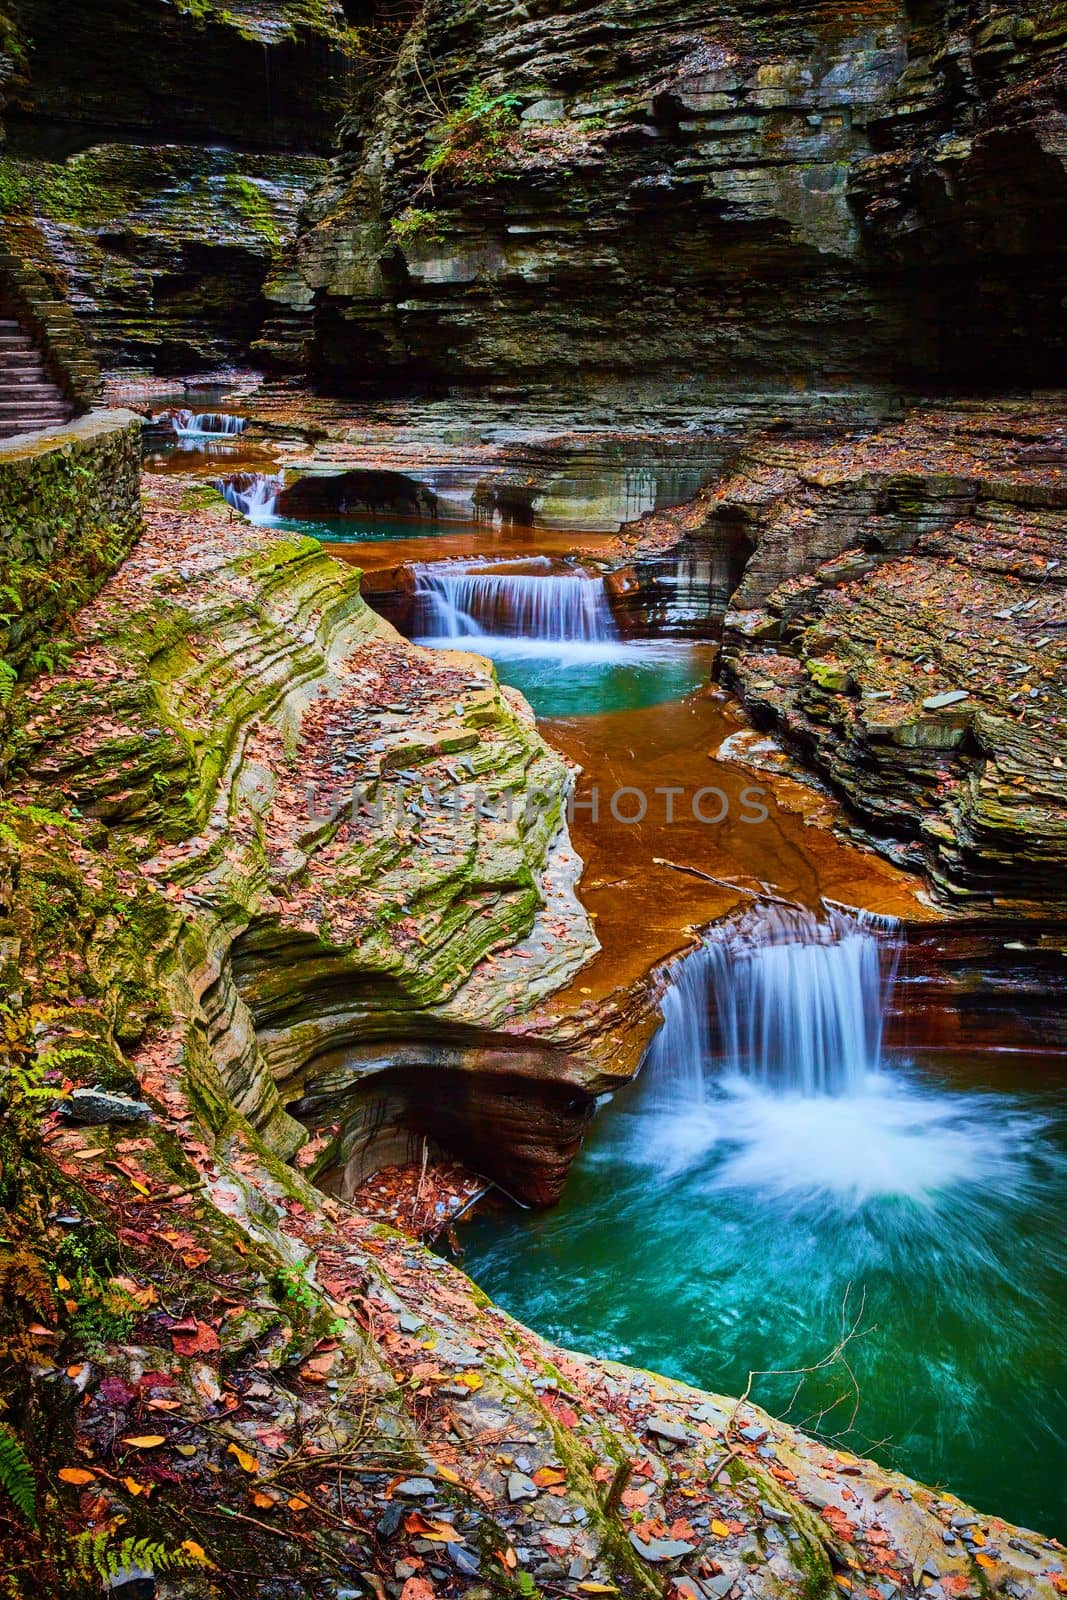 Image of River with cascading buckets of blue water and waterfalls through gorge of terraced rocks covered in fall leaves